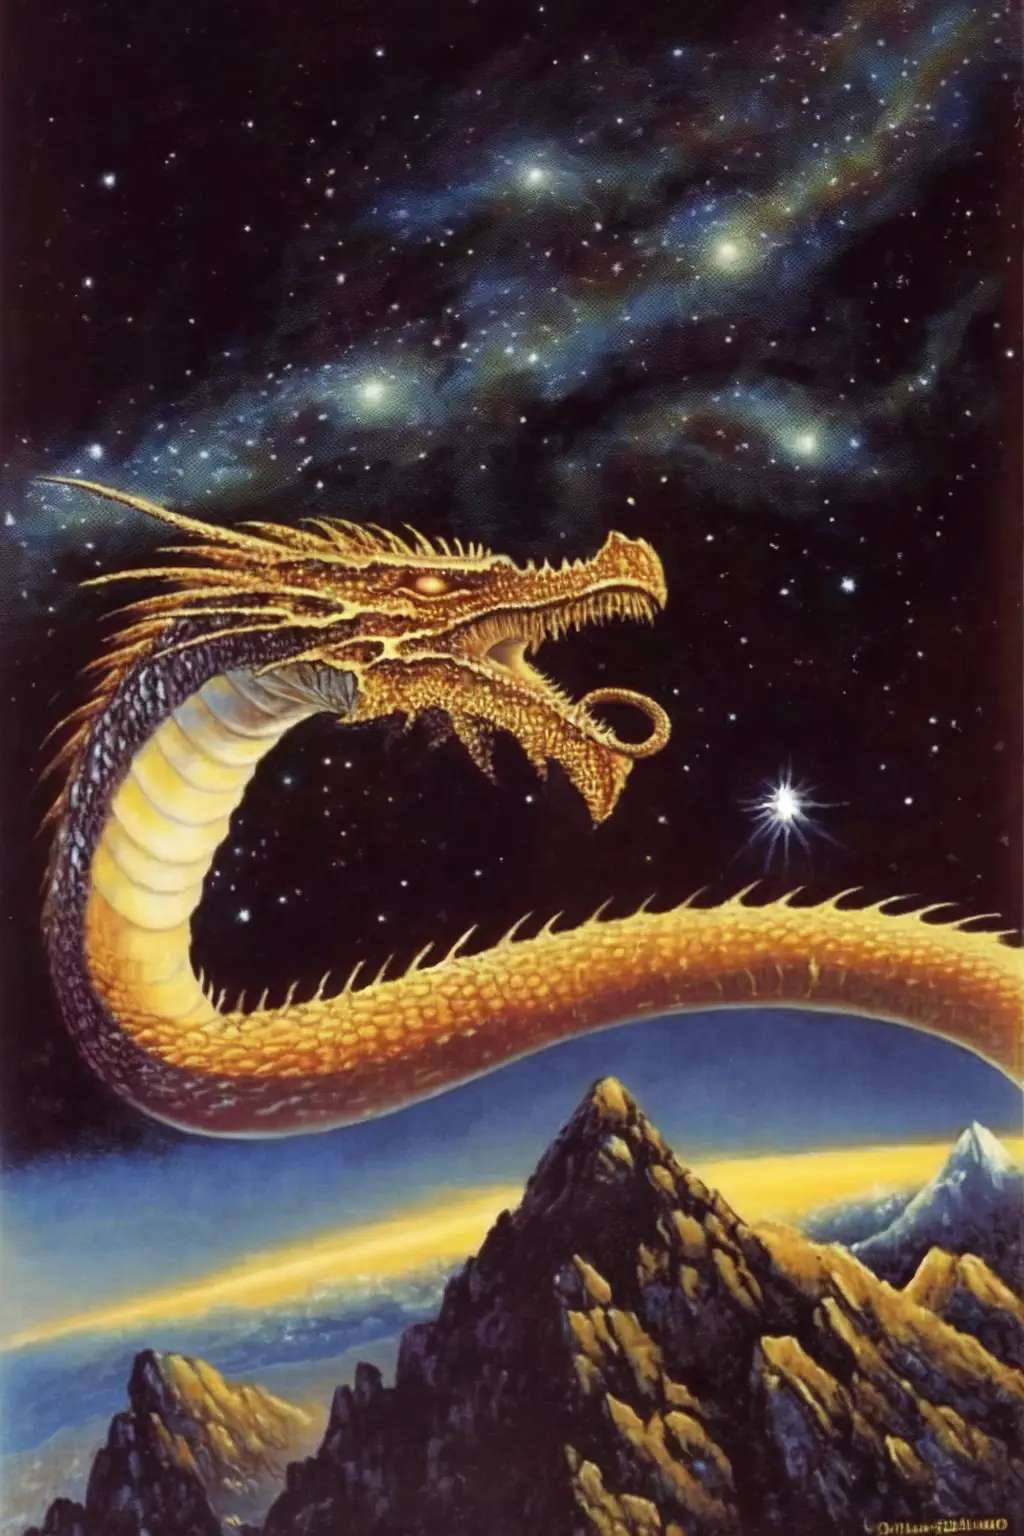 Hvost_enormous_golden_sea_serpent_in_the_night_ocean_distant_vo_06ae6b76-fc8e-4a5c-abc7-85d40726fbe2